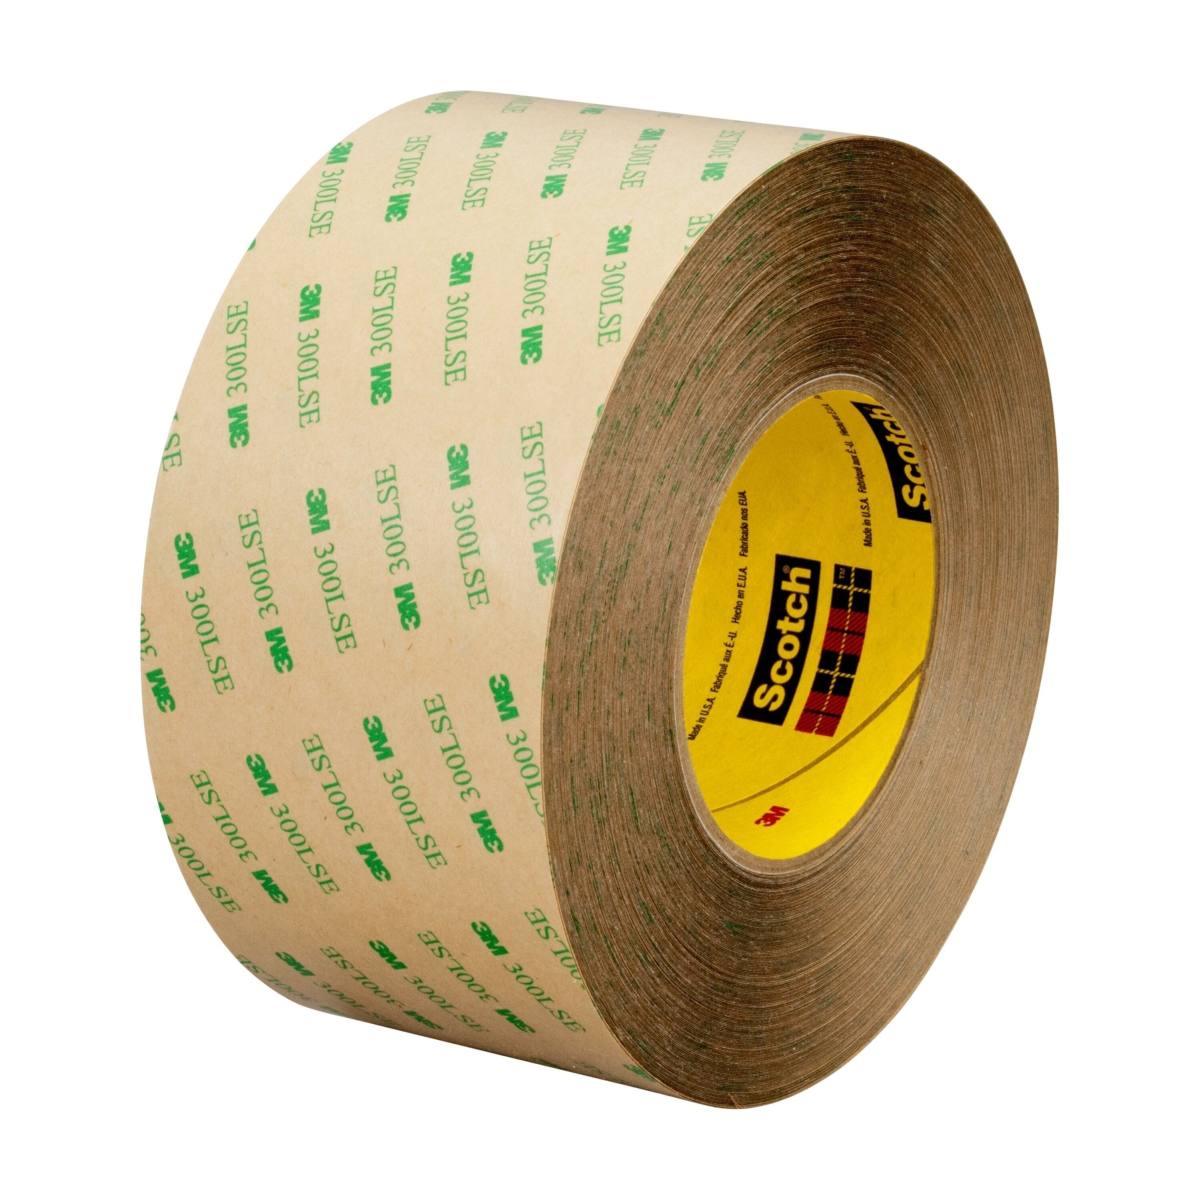 3M Dubbelzijdig plakband met polyester drager 93015LE, transparant, 15 mm x 55 m, 0,15 mm